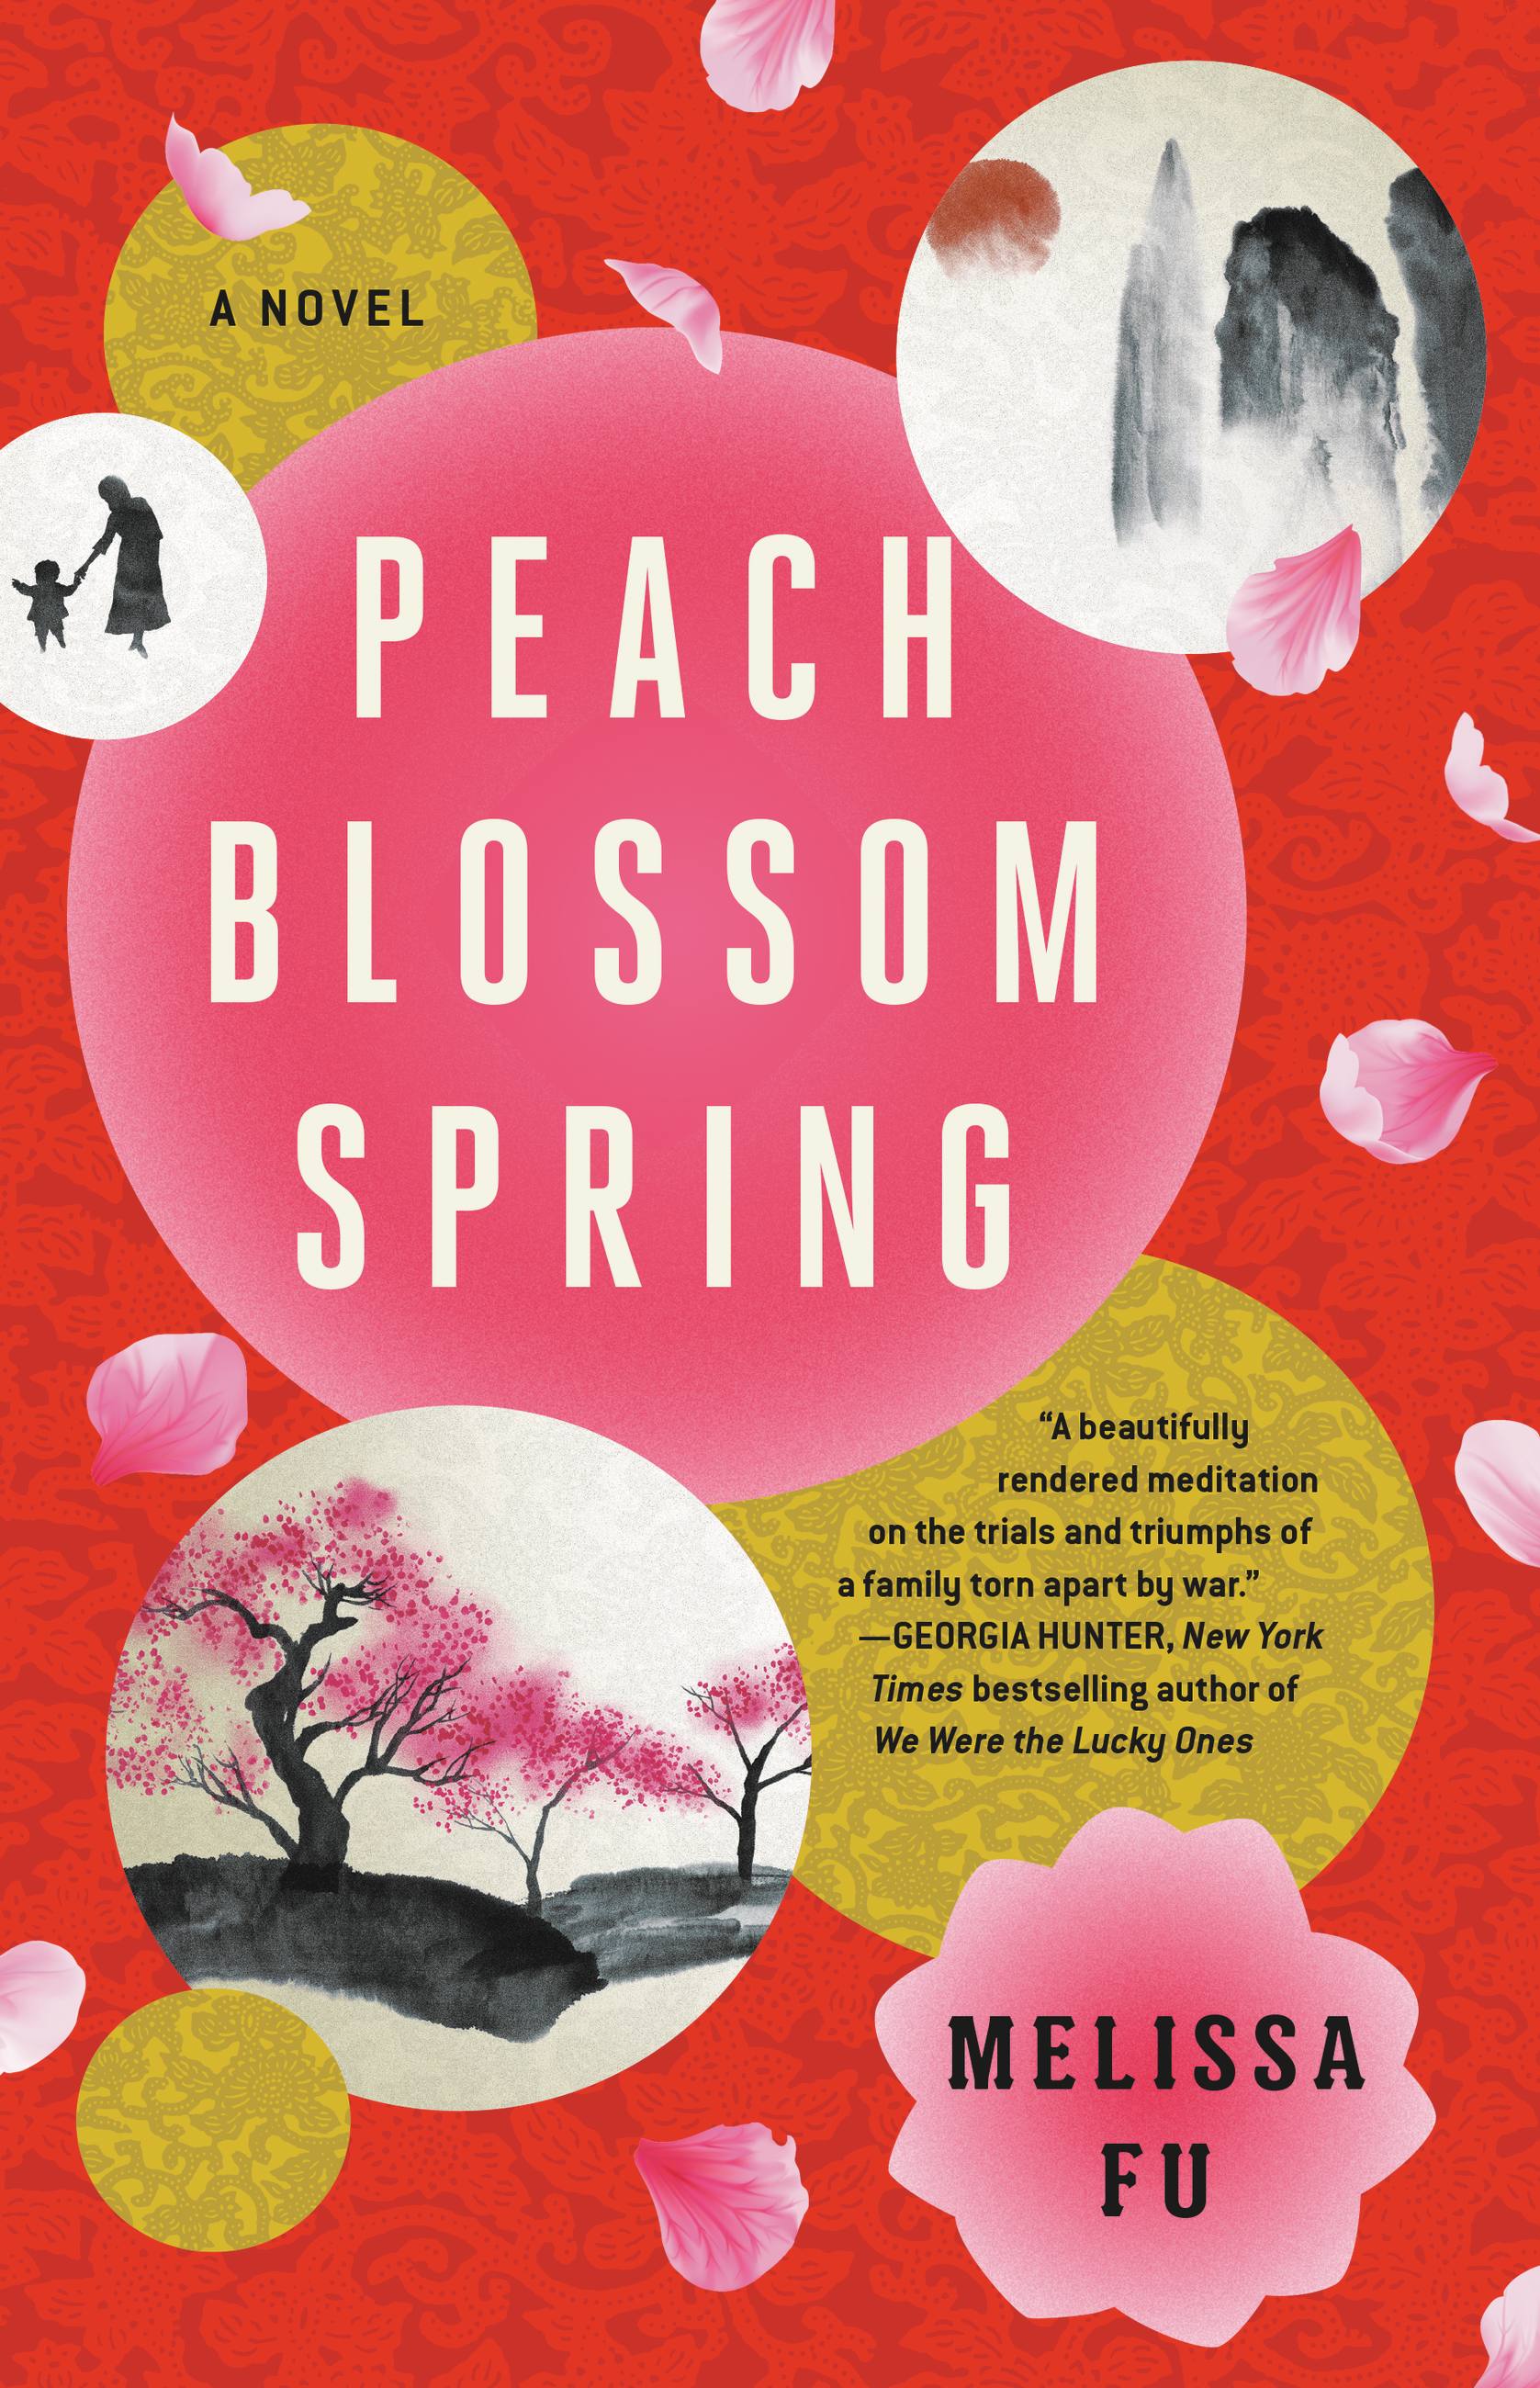 Peach Blossom Spring by Melissa Fu | Little, Brown and Company